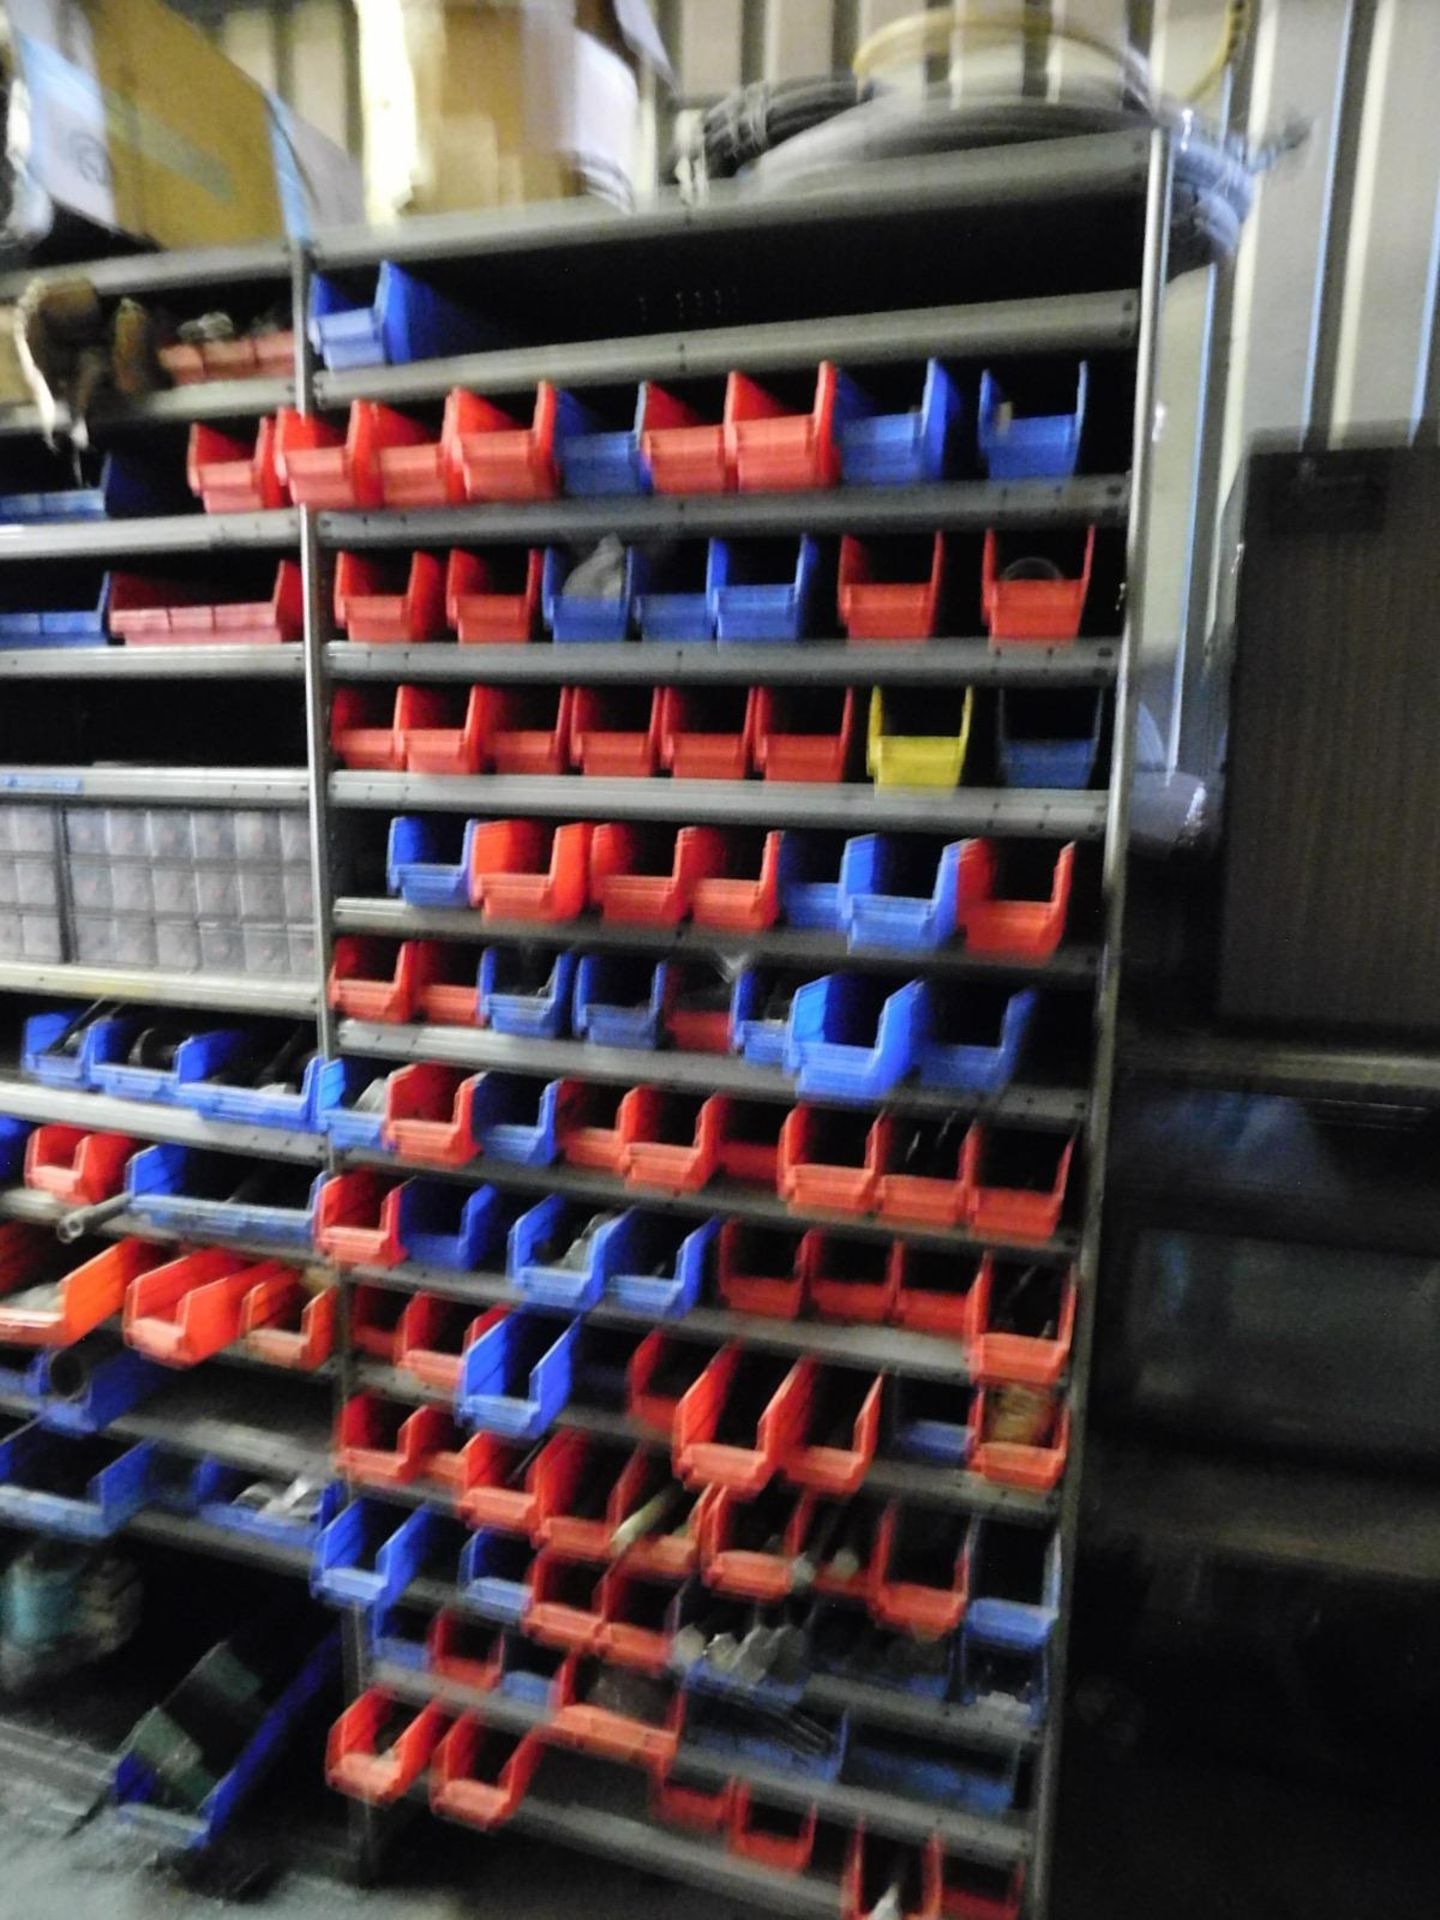 LOT - 18-1/2" OF 7' HEIGHT SHELVING FULL OF LARGE WRENCHES AND MISC HARDWARE